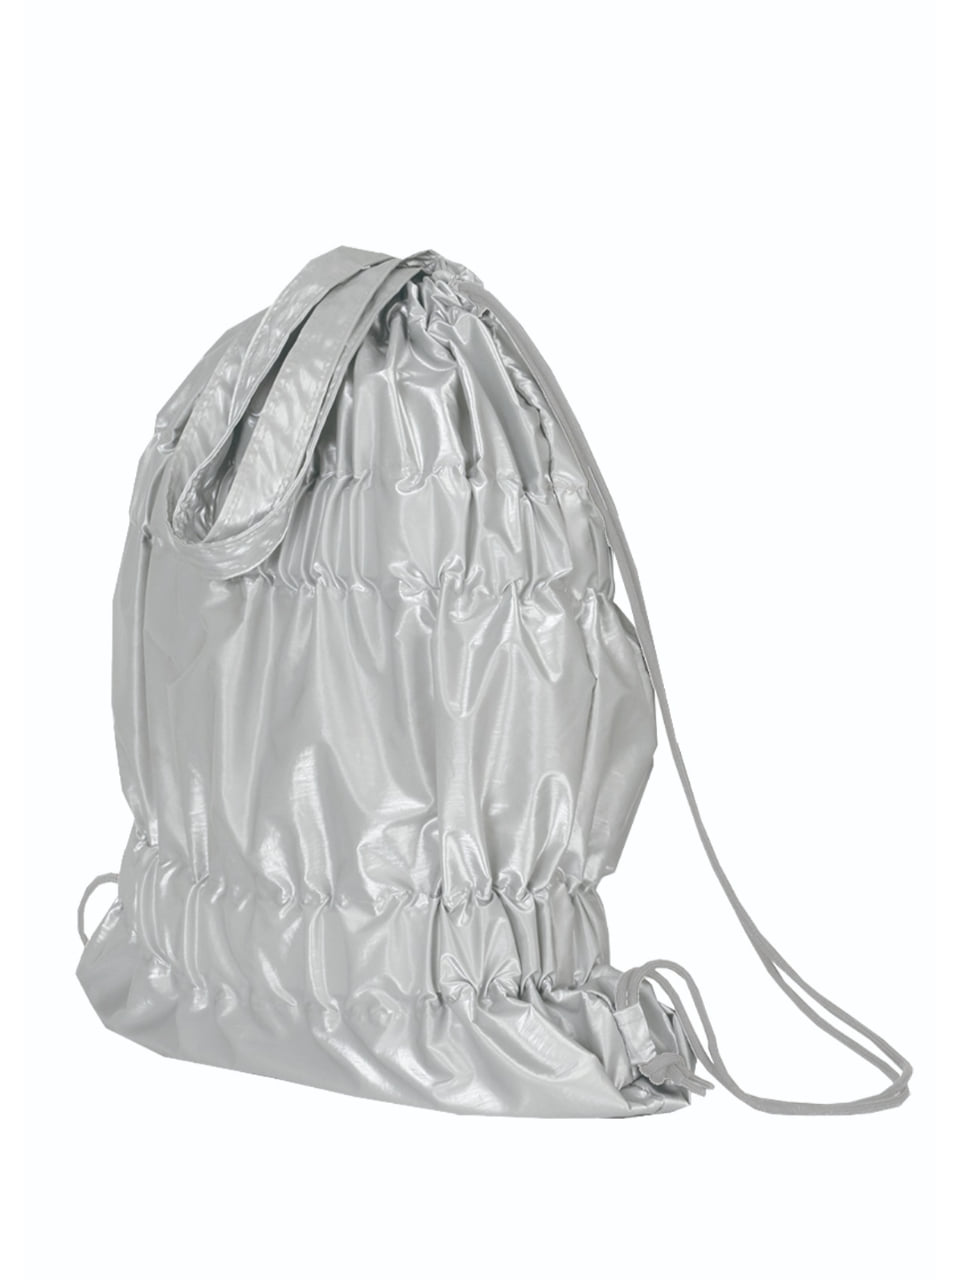 Tiered Banding Backpack_Silver